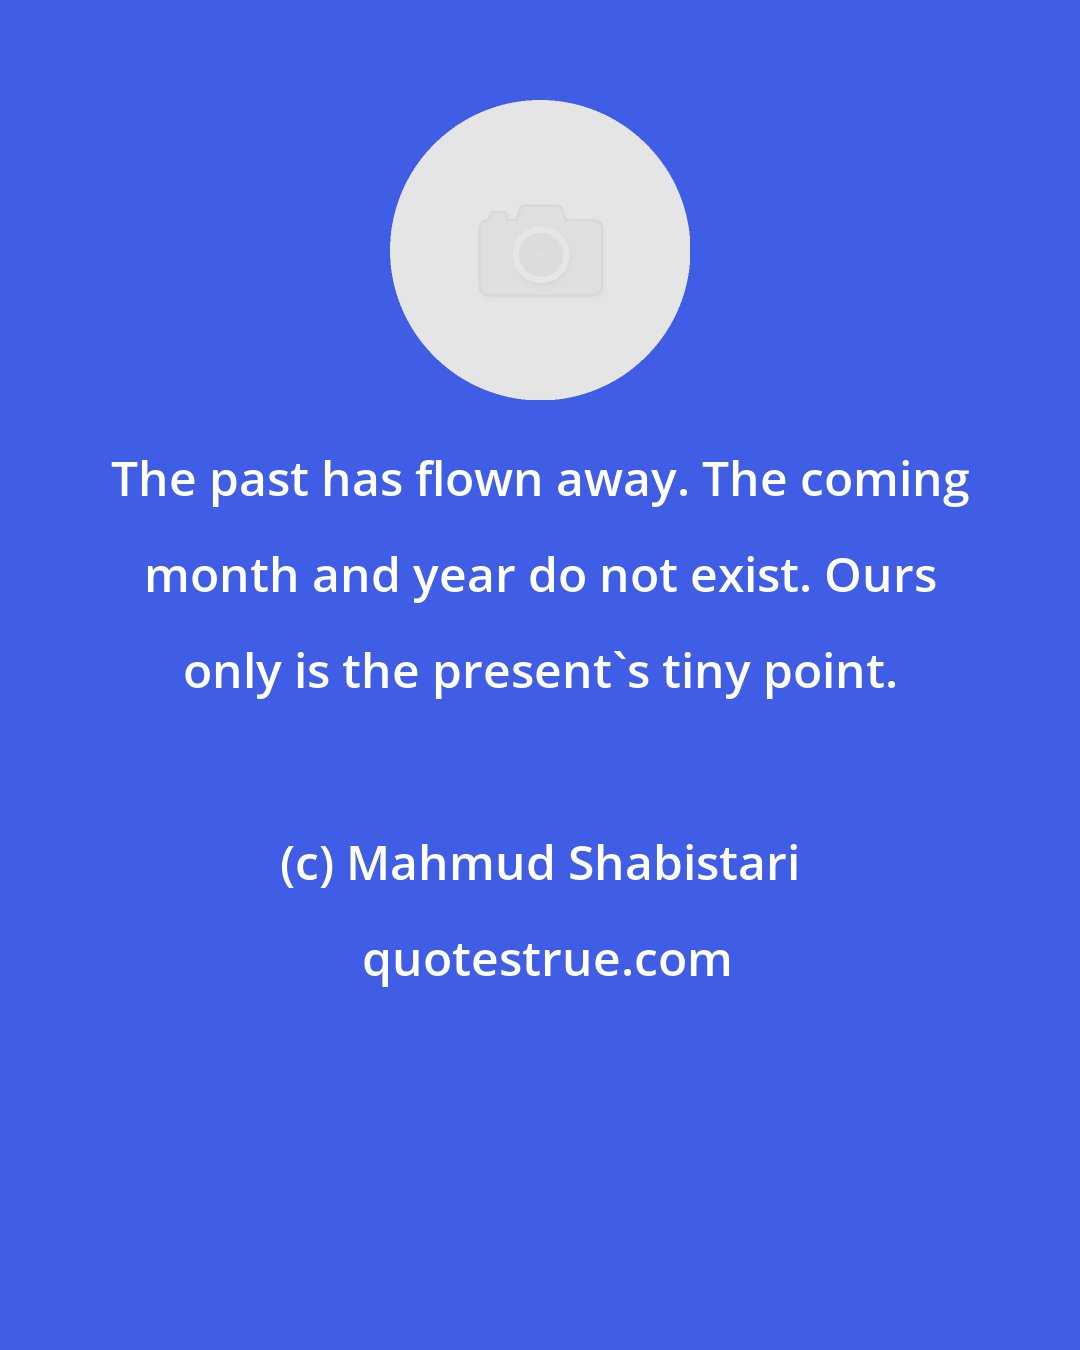 Mahmud Shabistari: The past has flown away. The coming month and year do not exist. Ours only is the present's tiny point.